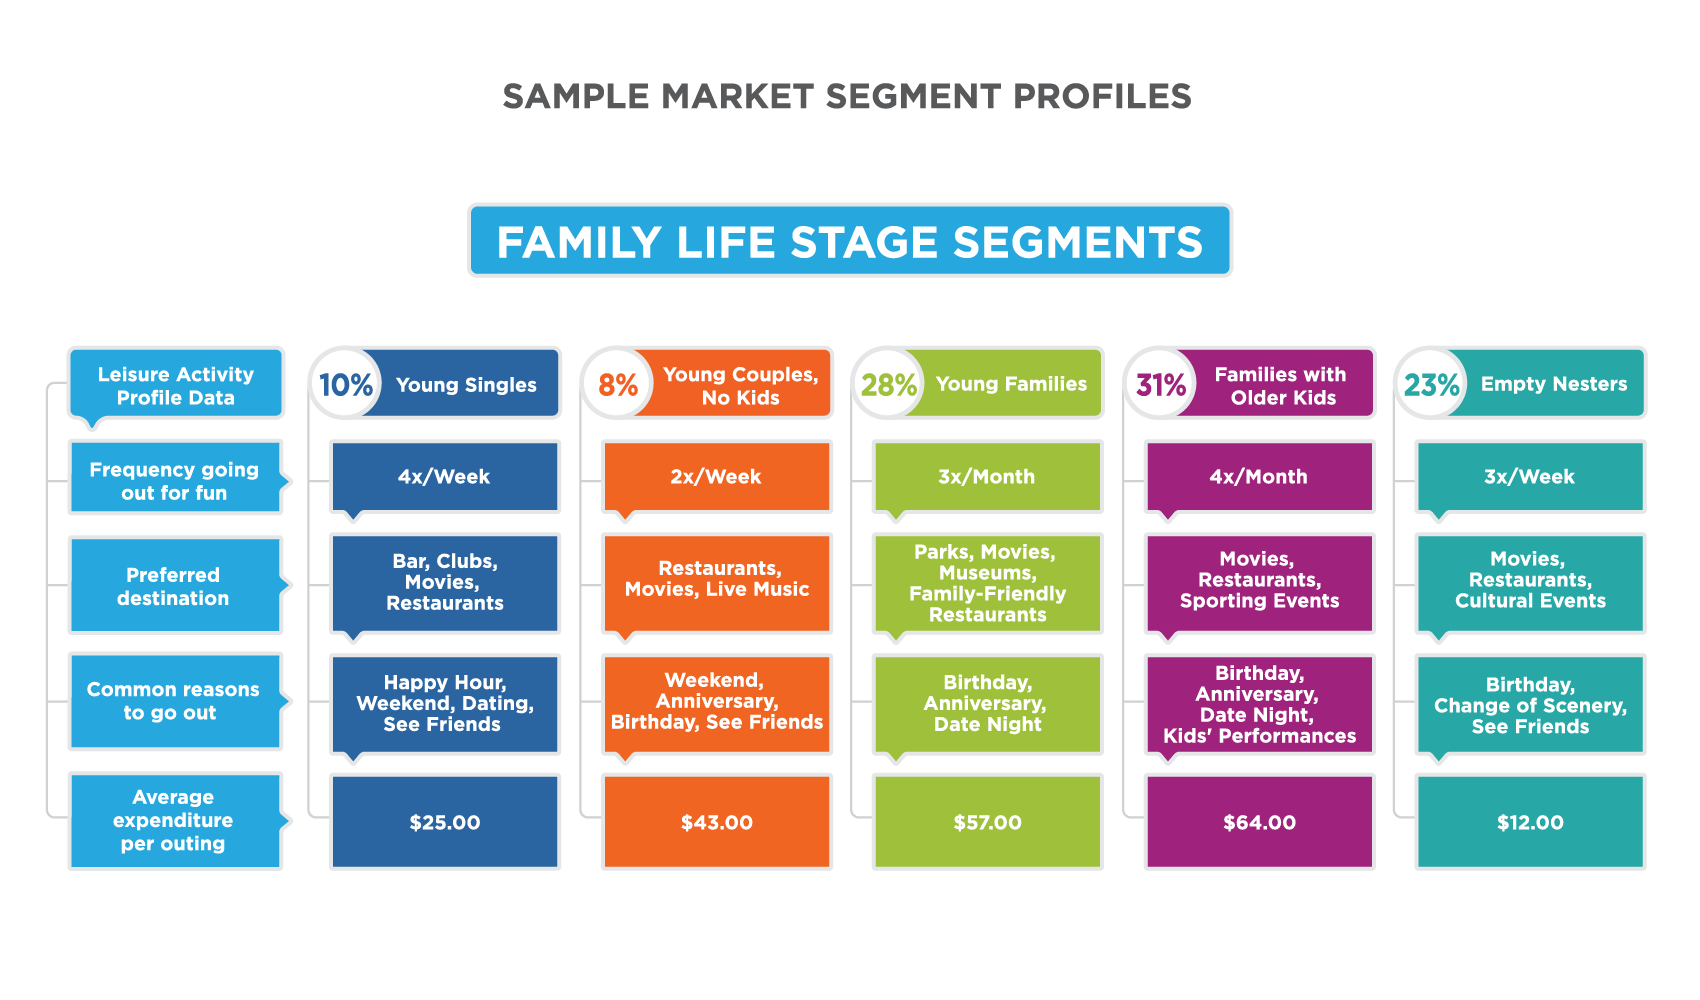 Chart titled Sample Market Segment Profiles: Family Life Stages Segments. Left-most Column is Young Singles (10%). Frequency of going out for fun: 4 outings per week. Preferred destination: bar, clubs, movies, restaurants. Common reasons to go out: Happy Hour, weekend, dating, see friends. Average expenditure per outing: $25. Second column is Young Couples, No Kids (8%). Frequency of going out for fun: 2 outings per week. Preferred destination: Restaurants, movies, live music. Common reasons to go out: weekend, anniversary, birthday, see friends. Average expenditure per outing: $43. Third column is Young Families (28%). Frequency of going out for fun: 3 outings per month. Preferred destination: parks, movies, museums, family-friendly restaurants. Common reasons to go out: birthday, anniversary, date night. Average expenditure per outing: $57. Fourth column is Families with older kids (31%). Frequency of going out for fun: 4 outings per month. Preferred destination: movies, restaurants, sporting events. Common reasons to go out: birthday, anniversary, date night, kids’ performances. Average expenditure per outing: $64. Fifth column is Empty nesters (23%). Frequency of going out for fun: 3 outings per week. Preferred destination: movies, restaurants, cultural events. Common reasons to go out: birthday, change of scenery, see friends. Average expenditure per outing: $12.